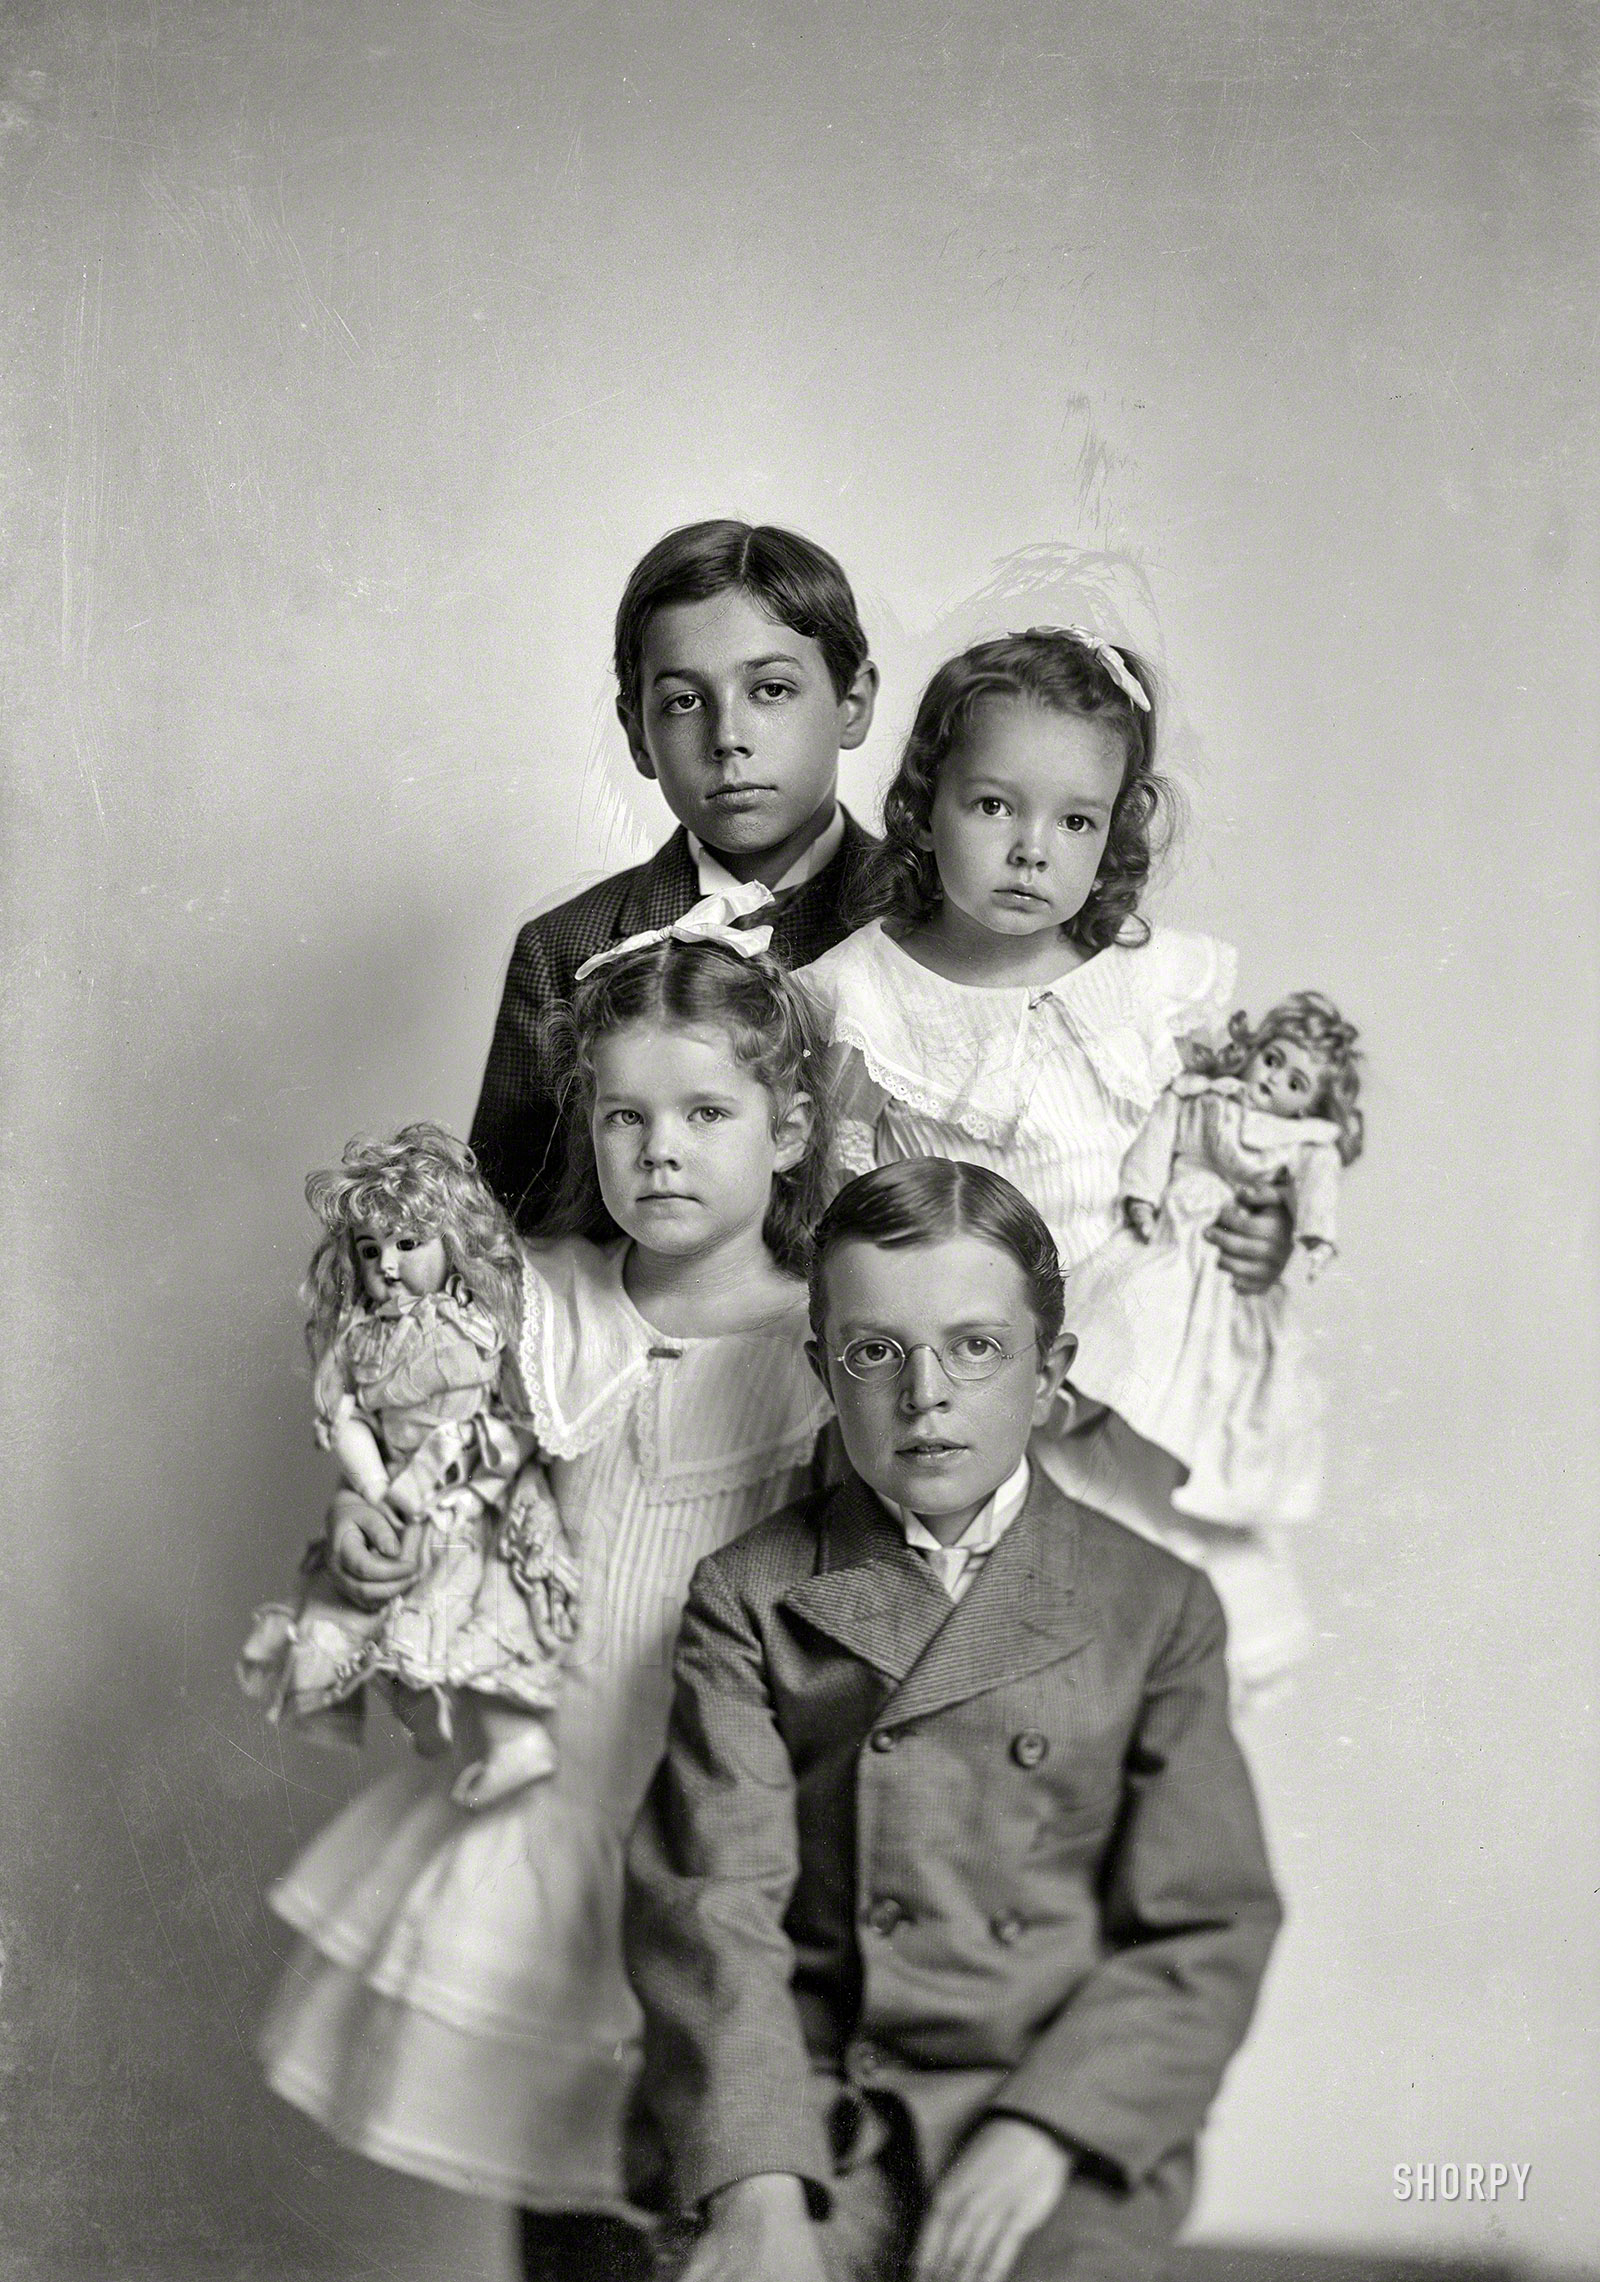 Circa 1905-1915. "Unidentified group (children; girls with dolls)." 5x7 glass negative from the C.M. Bell portrait studio in Washington, D.C. View full size.